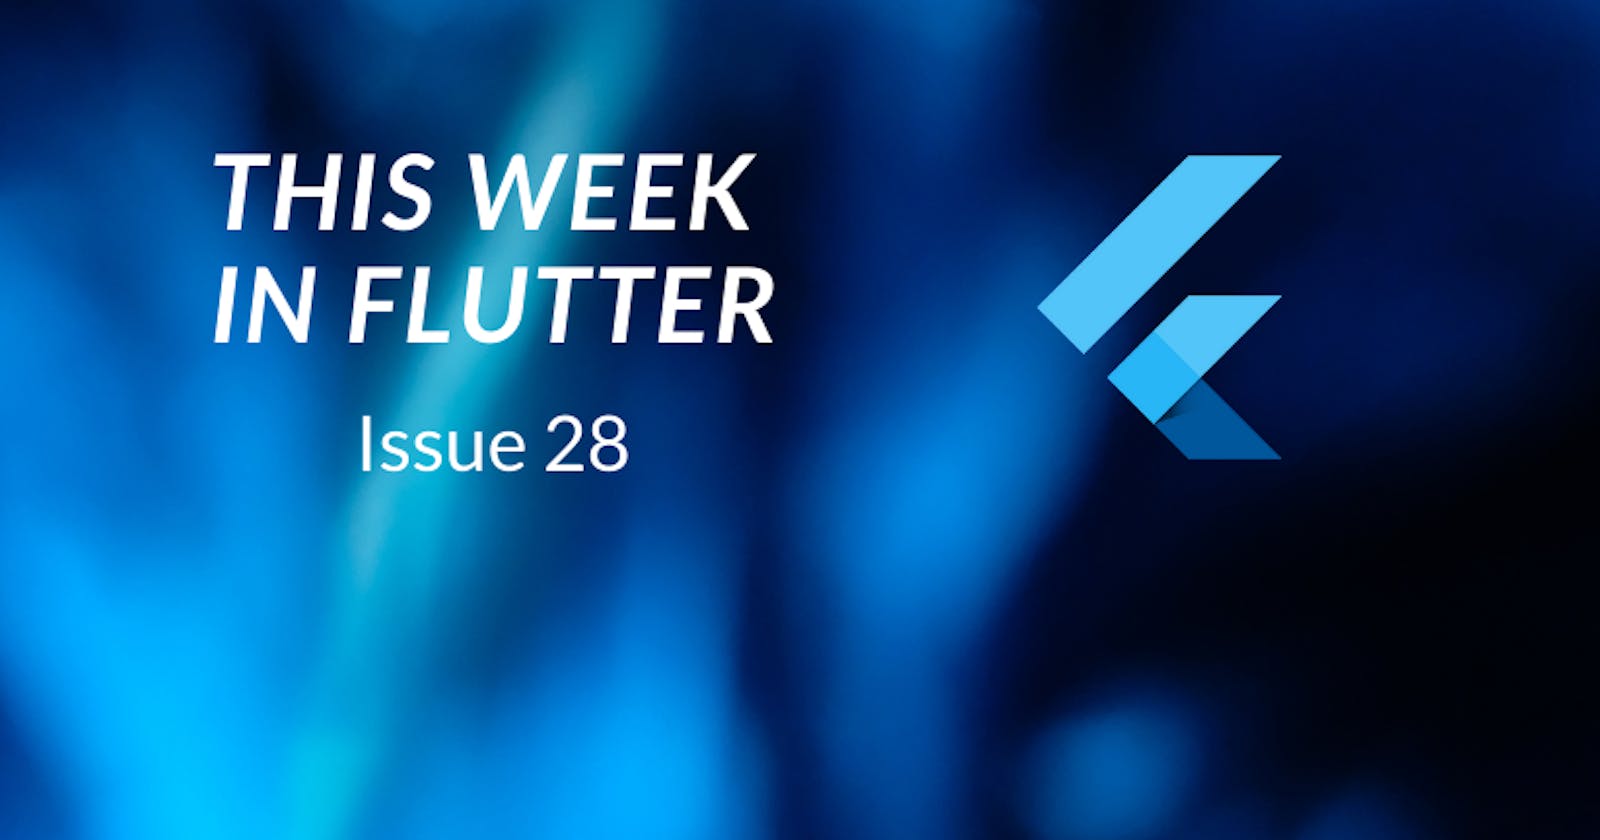 This week in Flutter #28